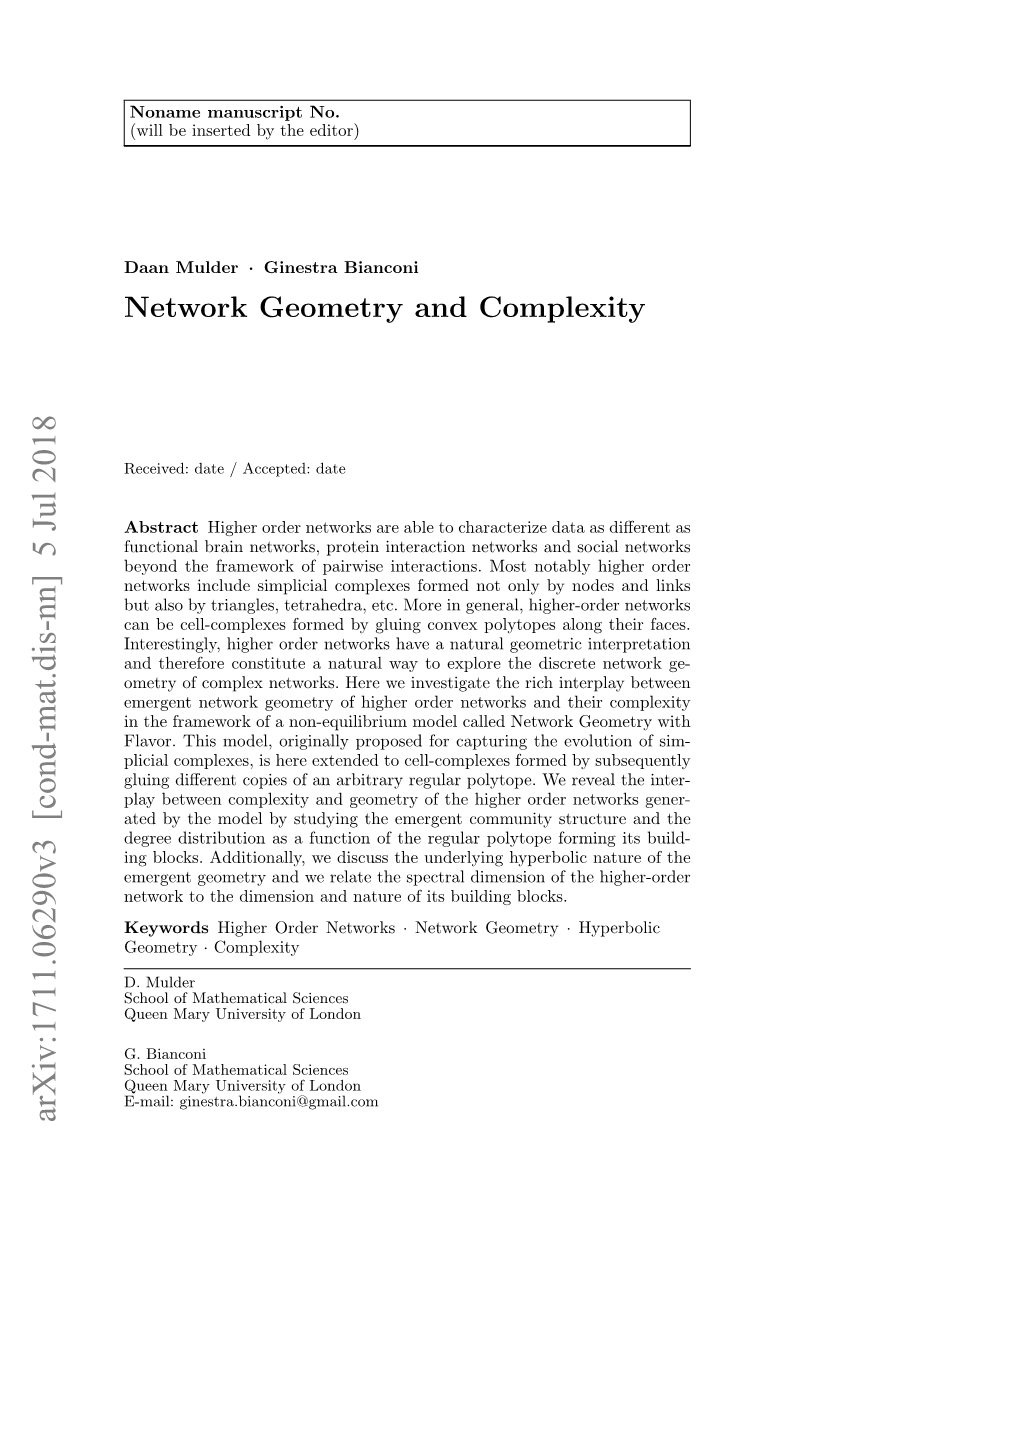 Network Geometry and Complexity